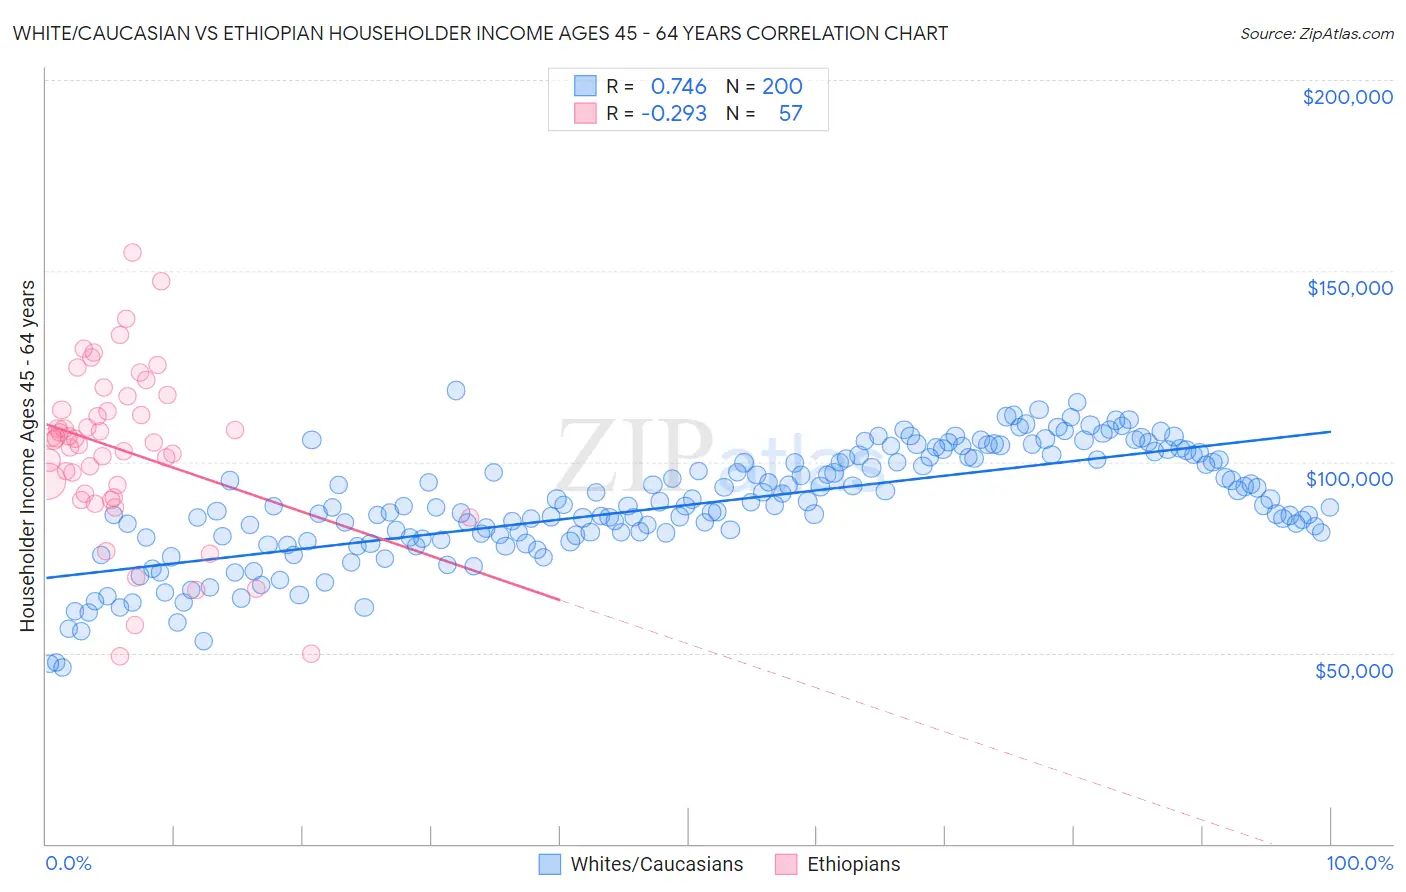 White/Caucasian vs Ethiopian Householder Income Ages 45 - 64 years